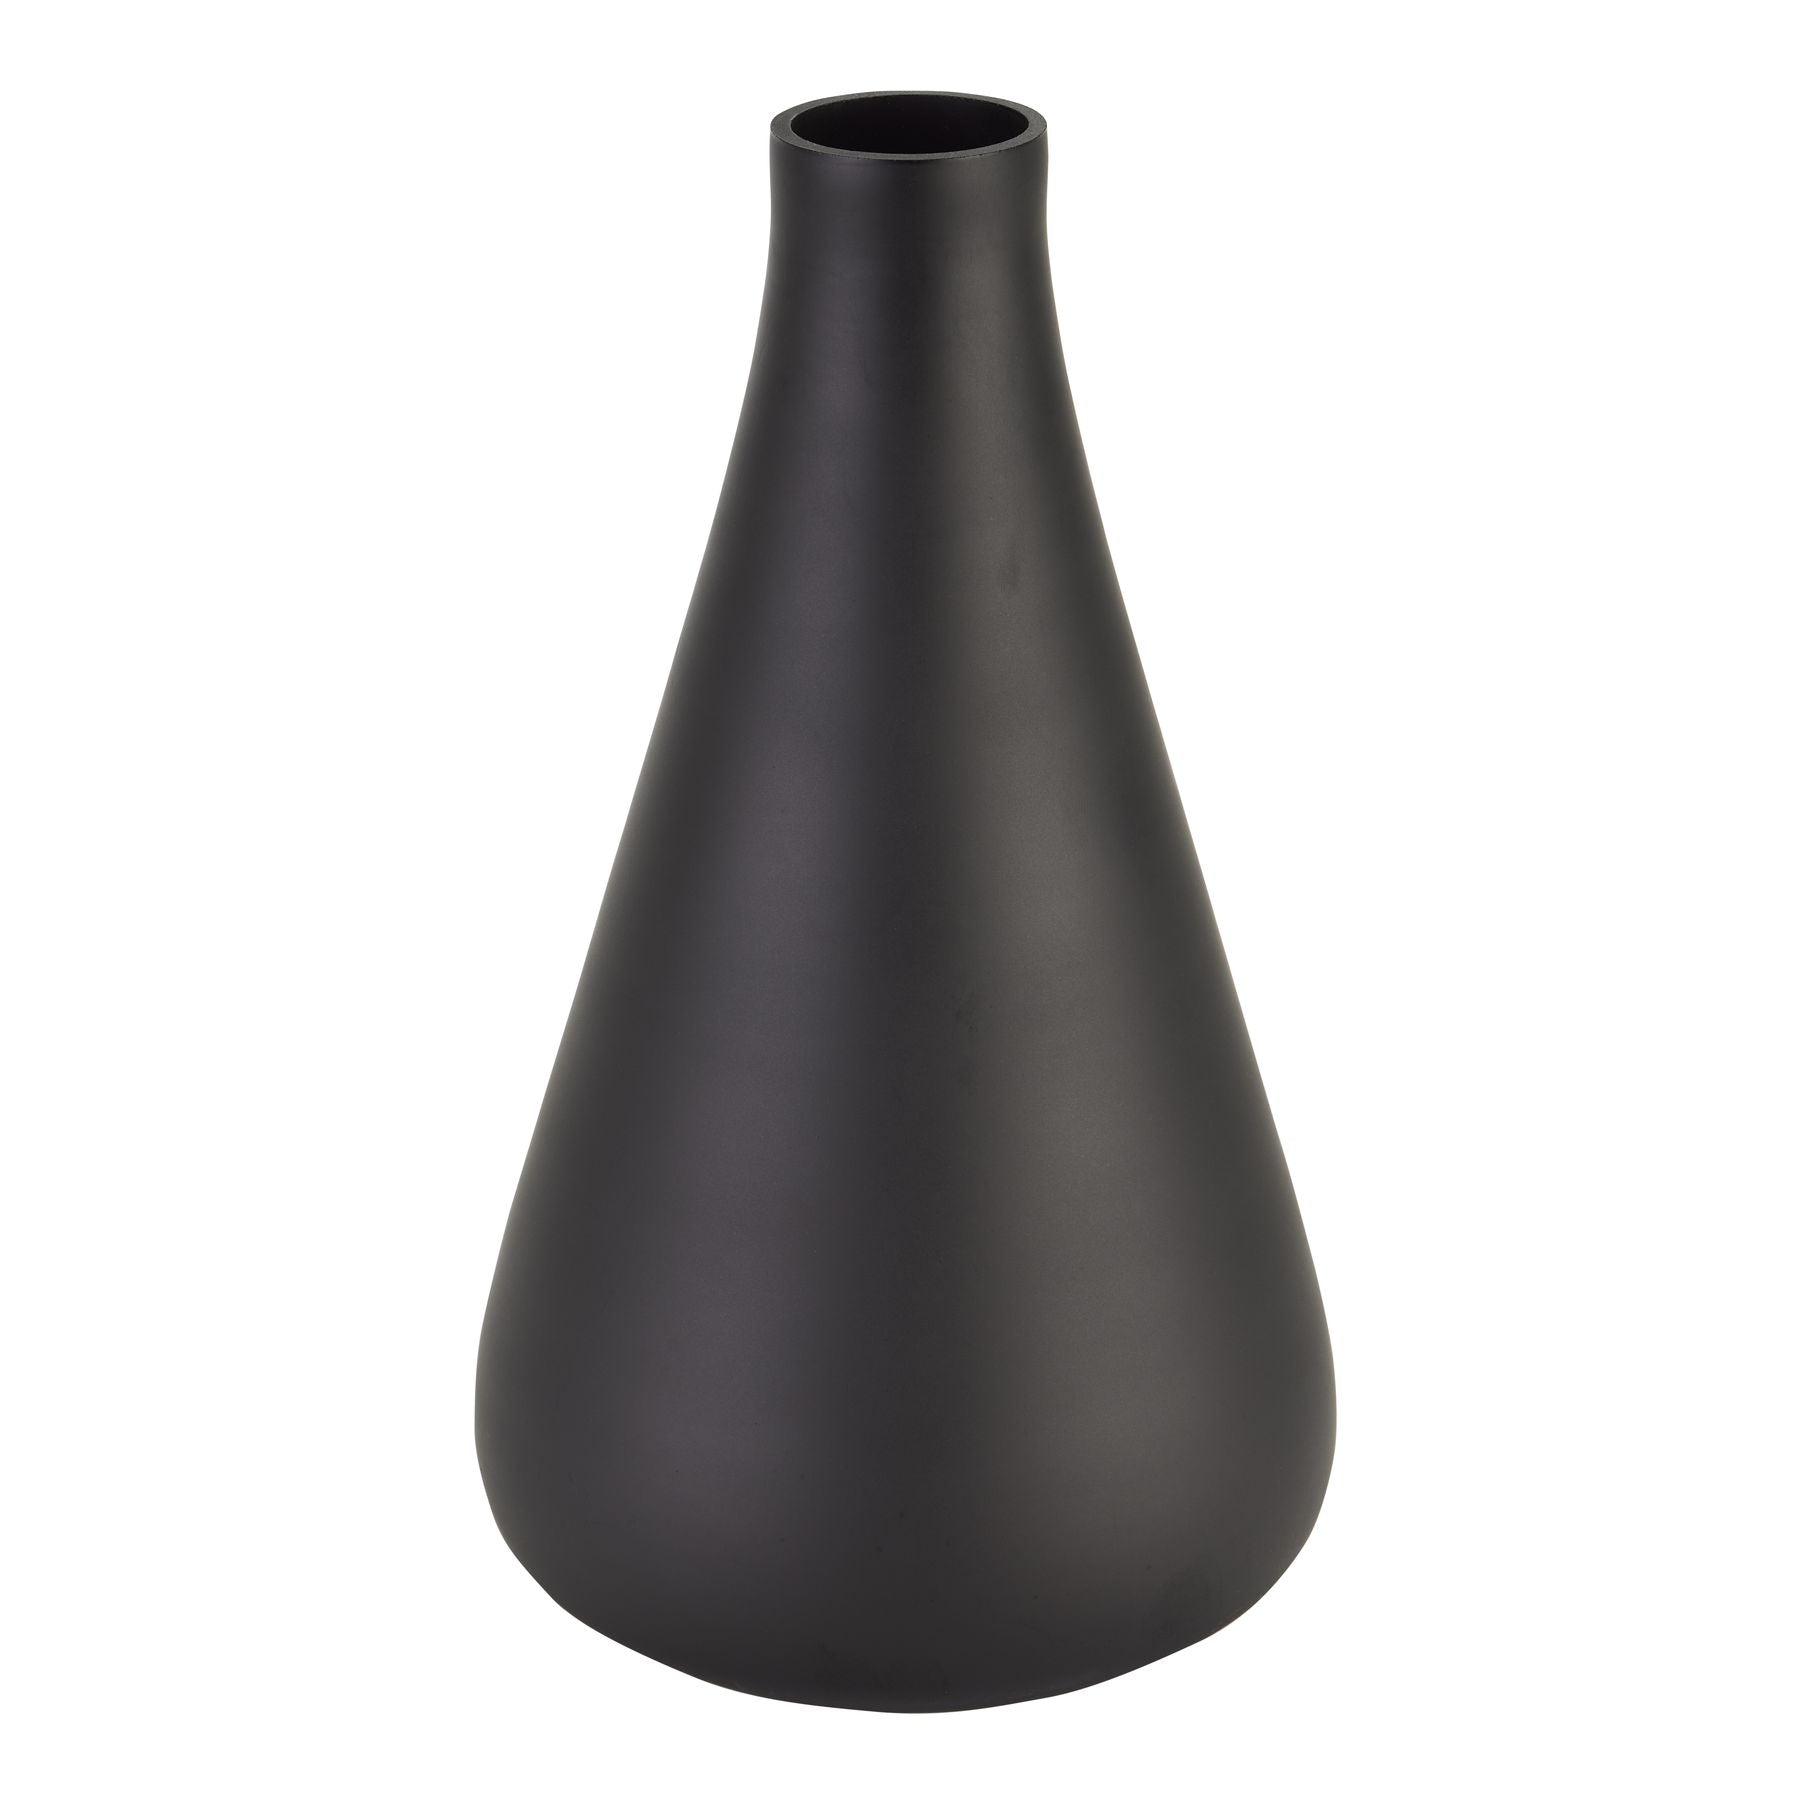 View Black Tapered Tall Glass Vase information